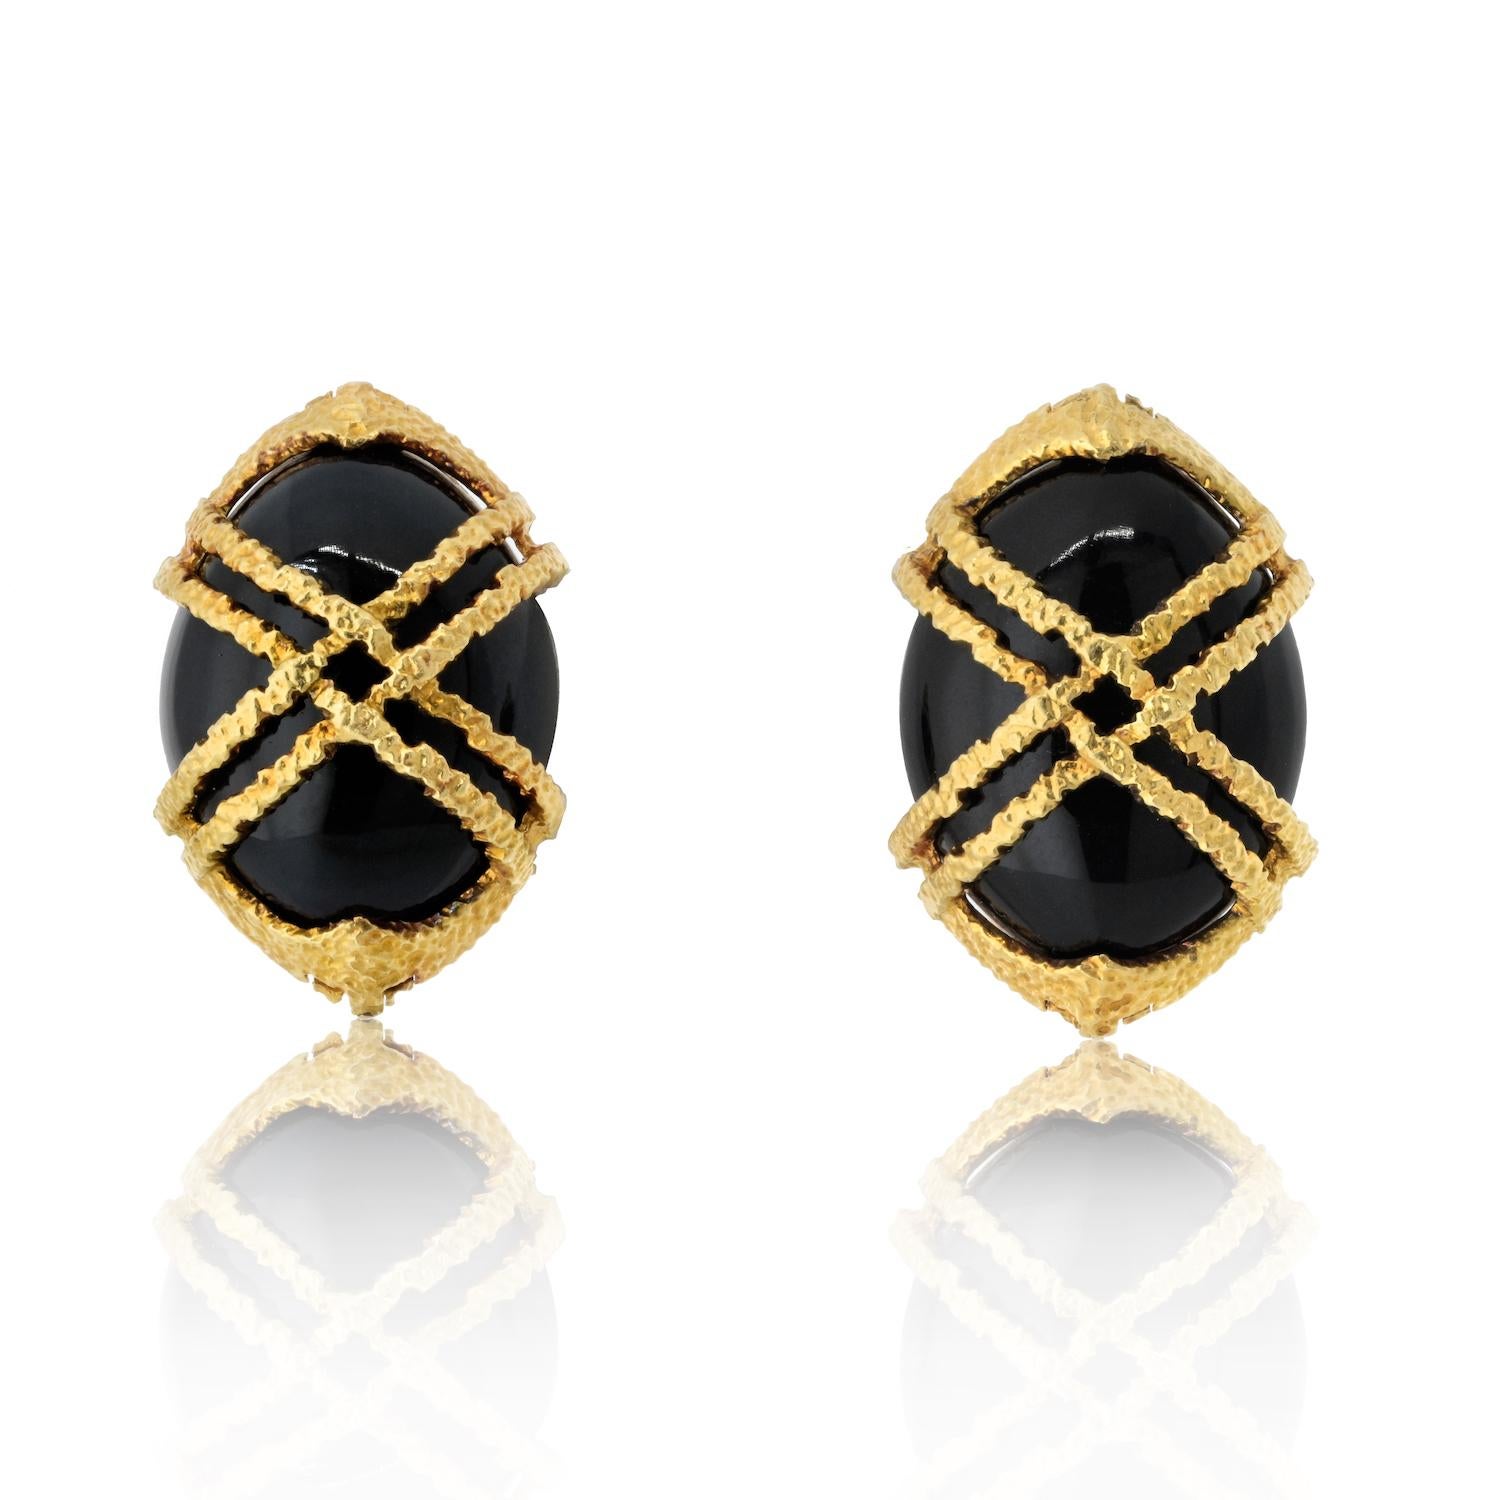 Indulge in the timeless elegance of this pair of earrings from Cartier, a stunning addition to the retro and modernist-inspired set. Crafted with exceptional craftsmanship, these earrings boast solid 18-karat yellow gold with a highly textured